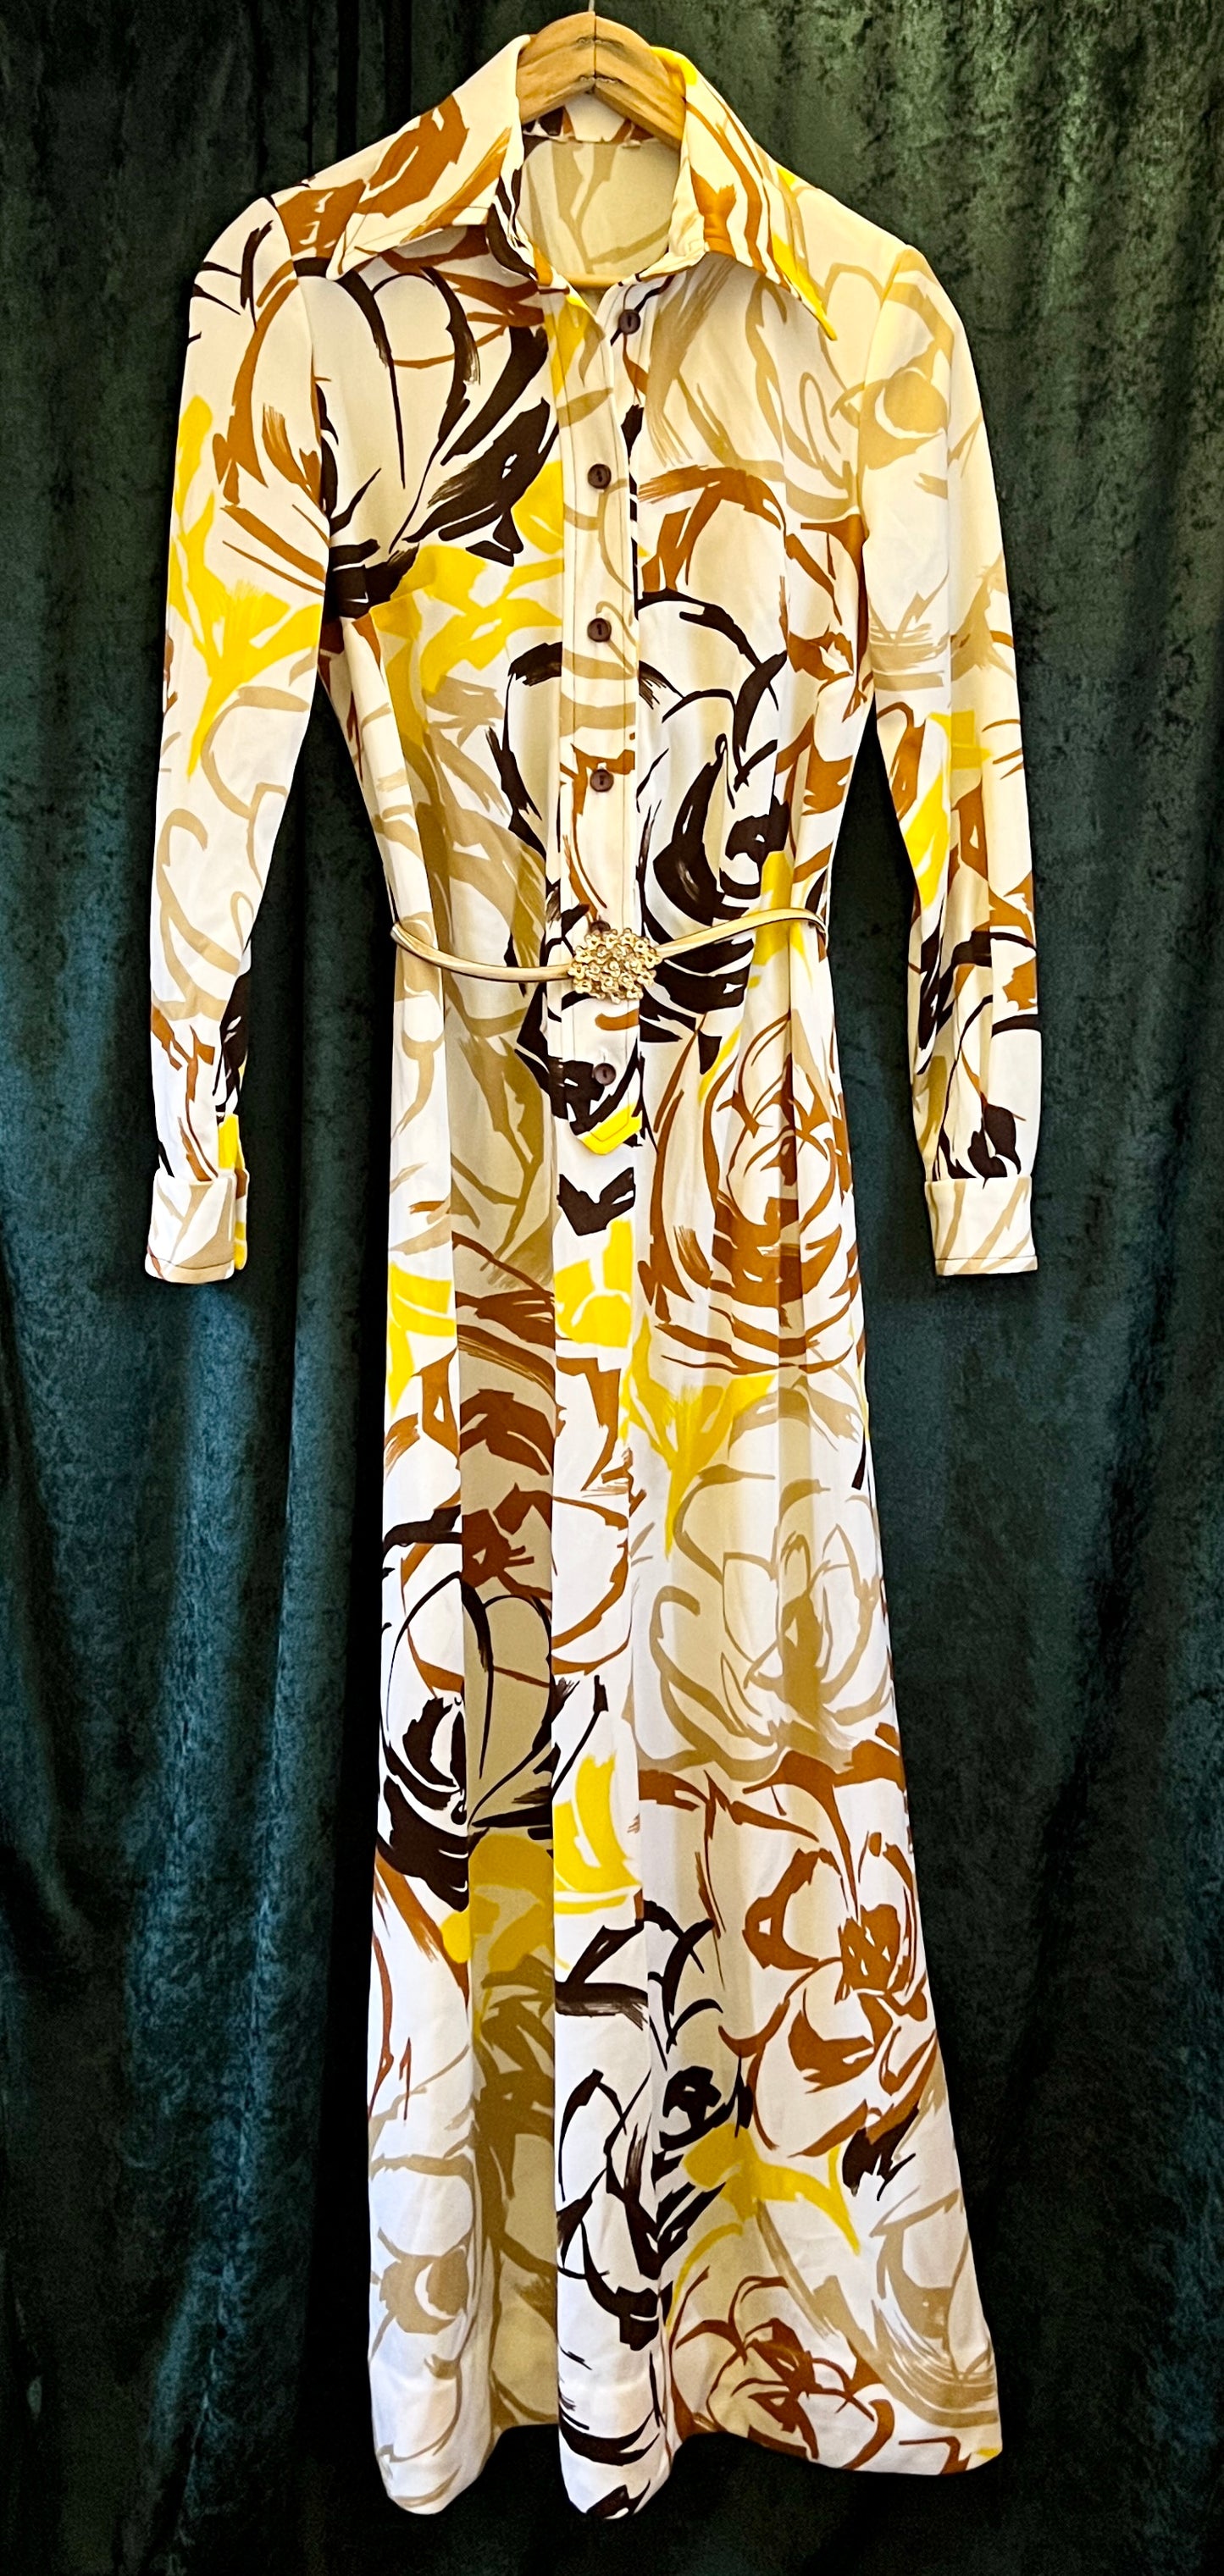 Vintage 1970s psychedelic print maxi dress gown long sleeves dagger collar sz M L